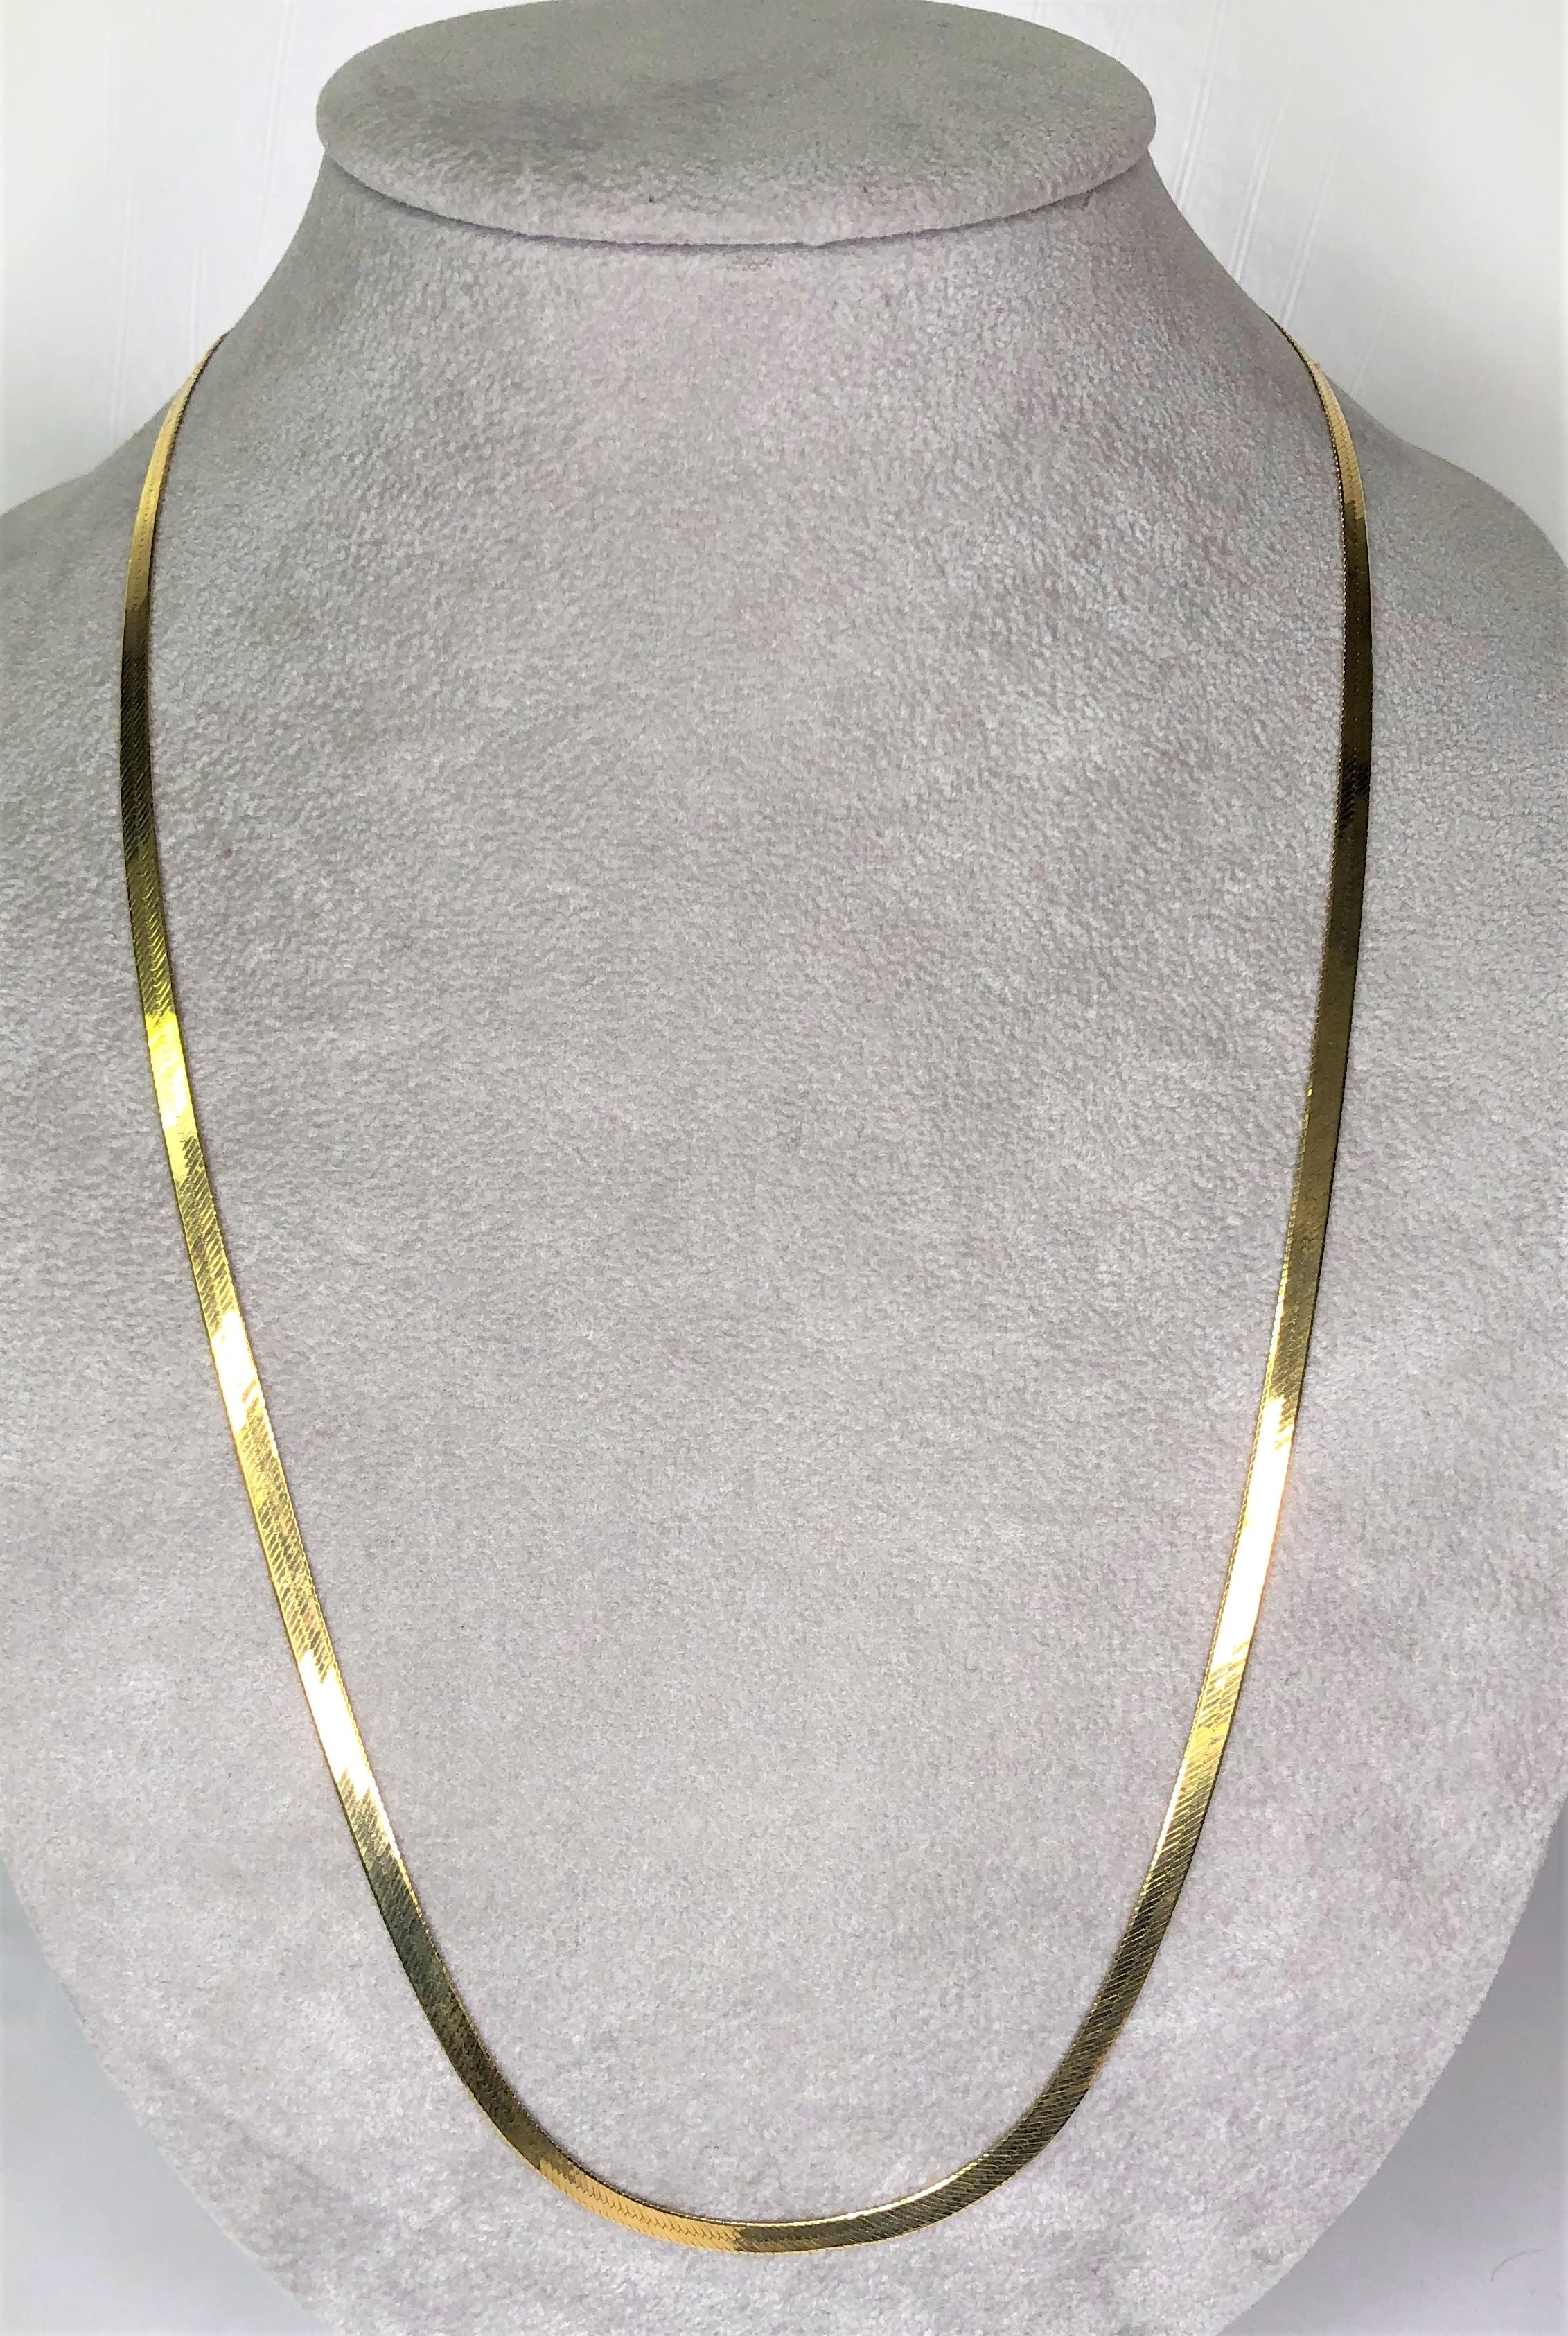 This classic necklace shines from across the room!
In excellent condition!
14 karat yellow gold, approximately 3.5mm
Matinee style, 24 inches long
Lobster clasp stamped 